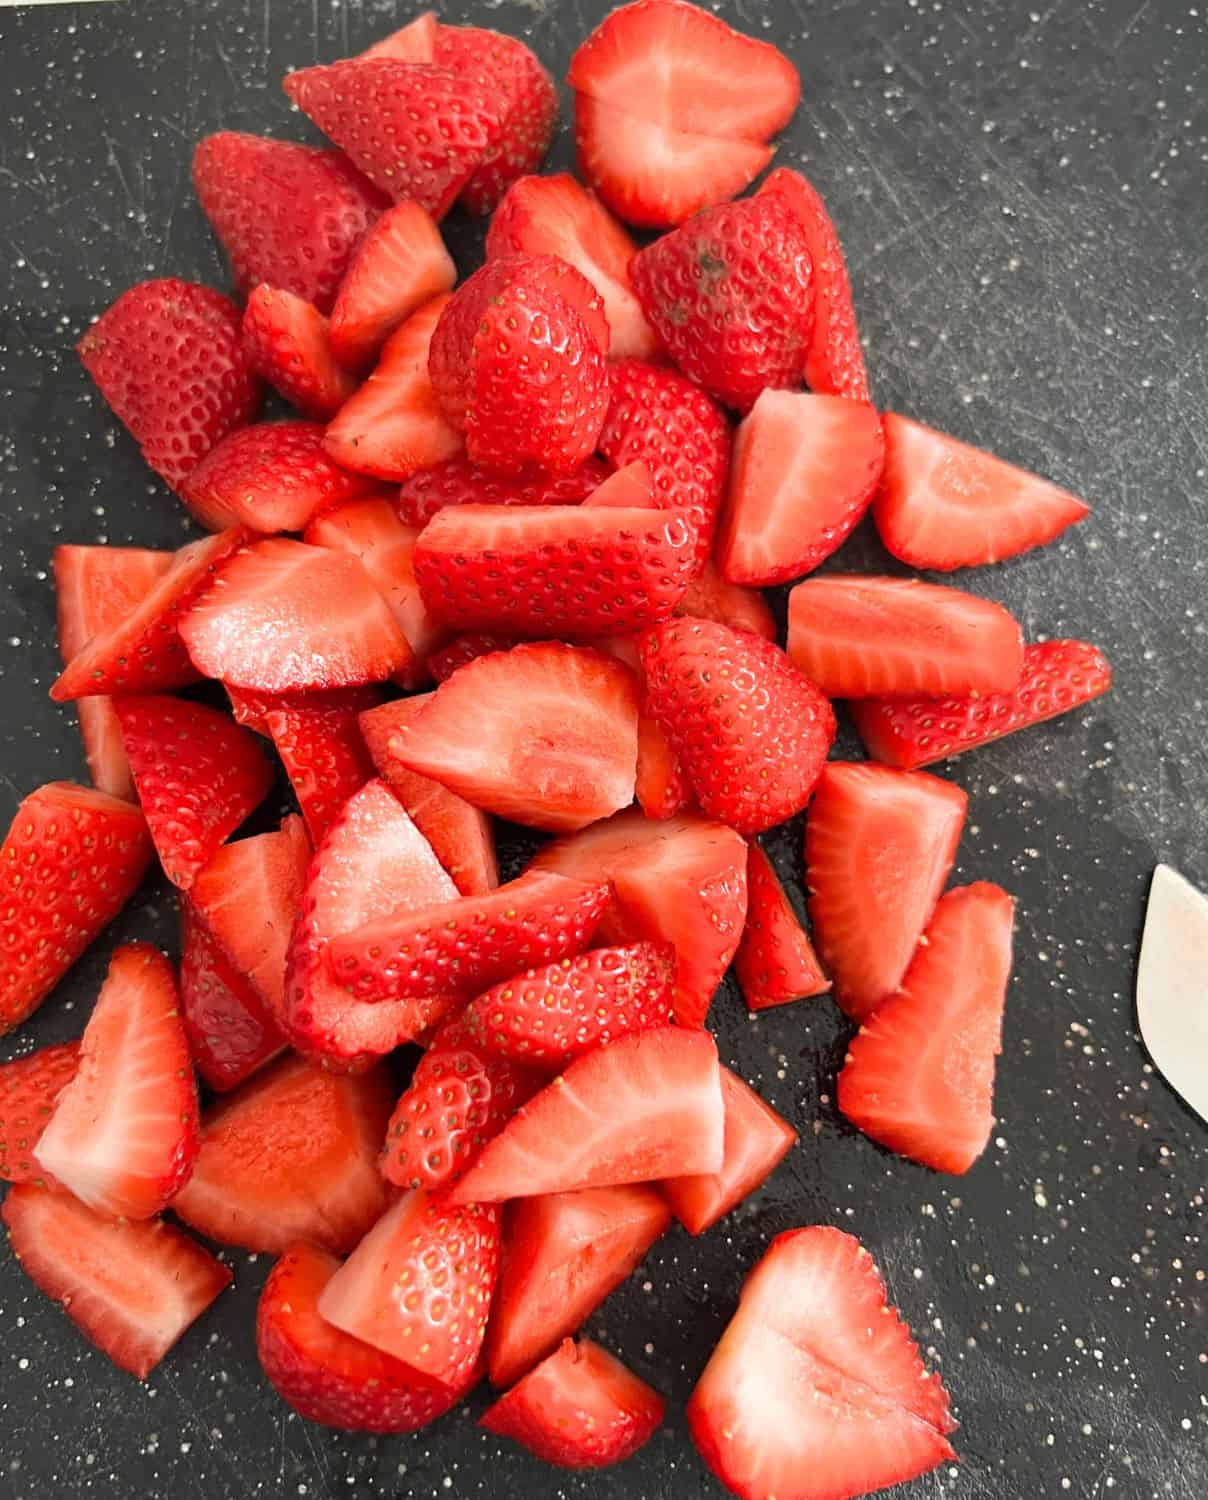 Cut up strawberries on a plate. 